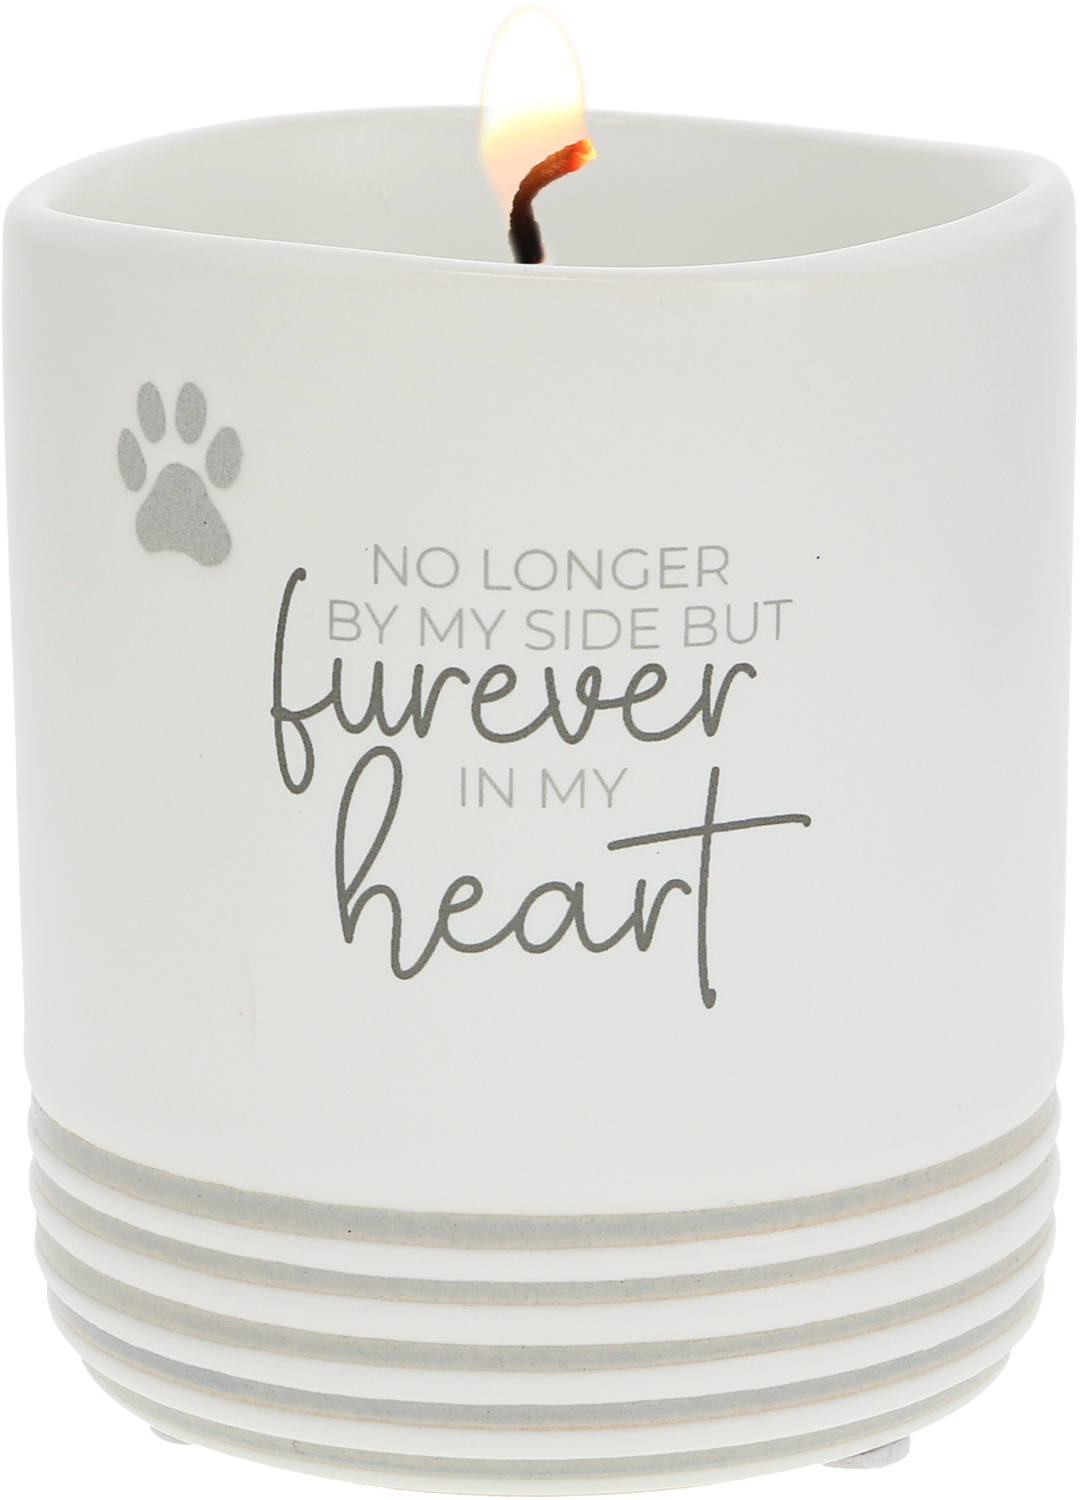 Furever in My Heart by Furever Pawsome - Furever in My Heart - 10 oz - 100% Soy Wax Reveal Candle
Scent: Tranquility